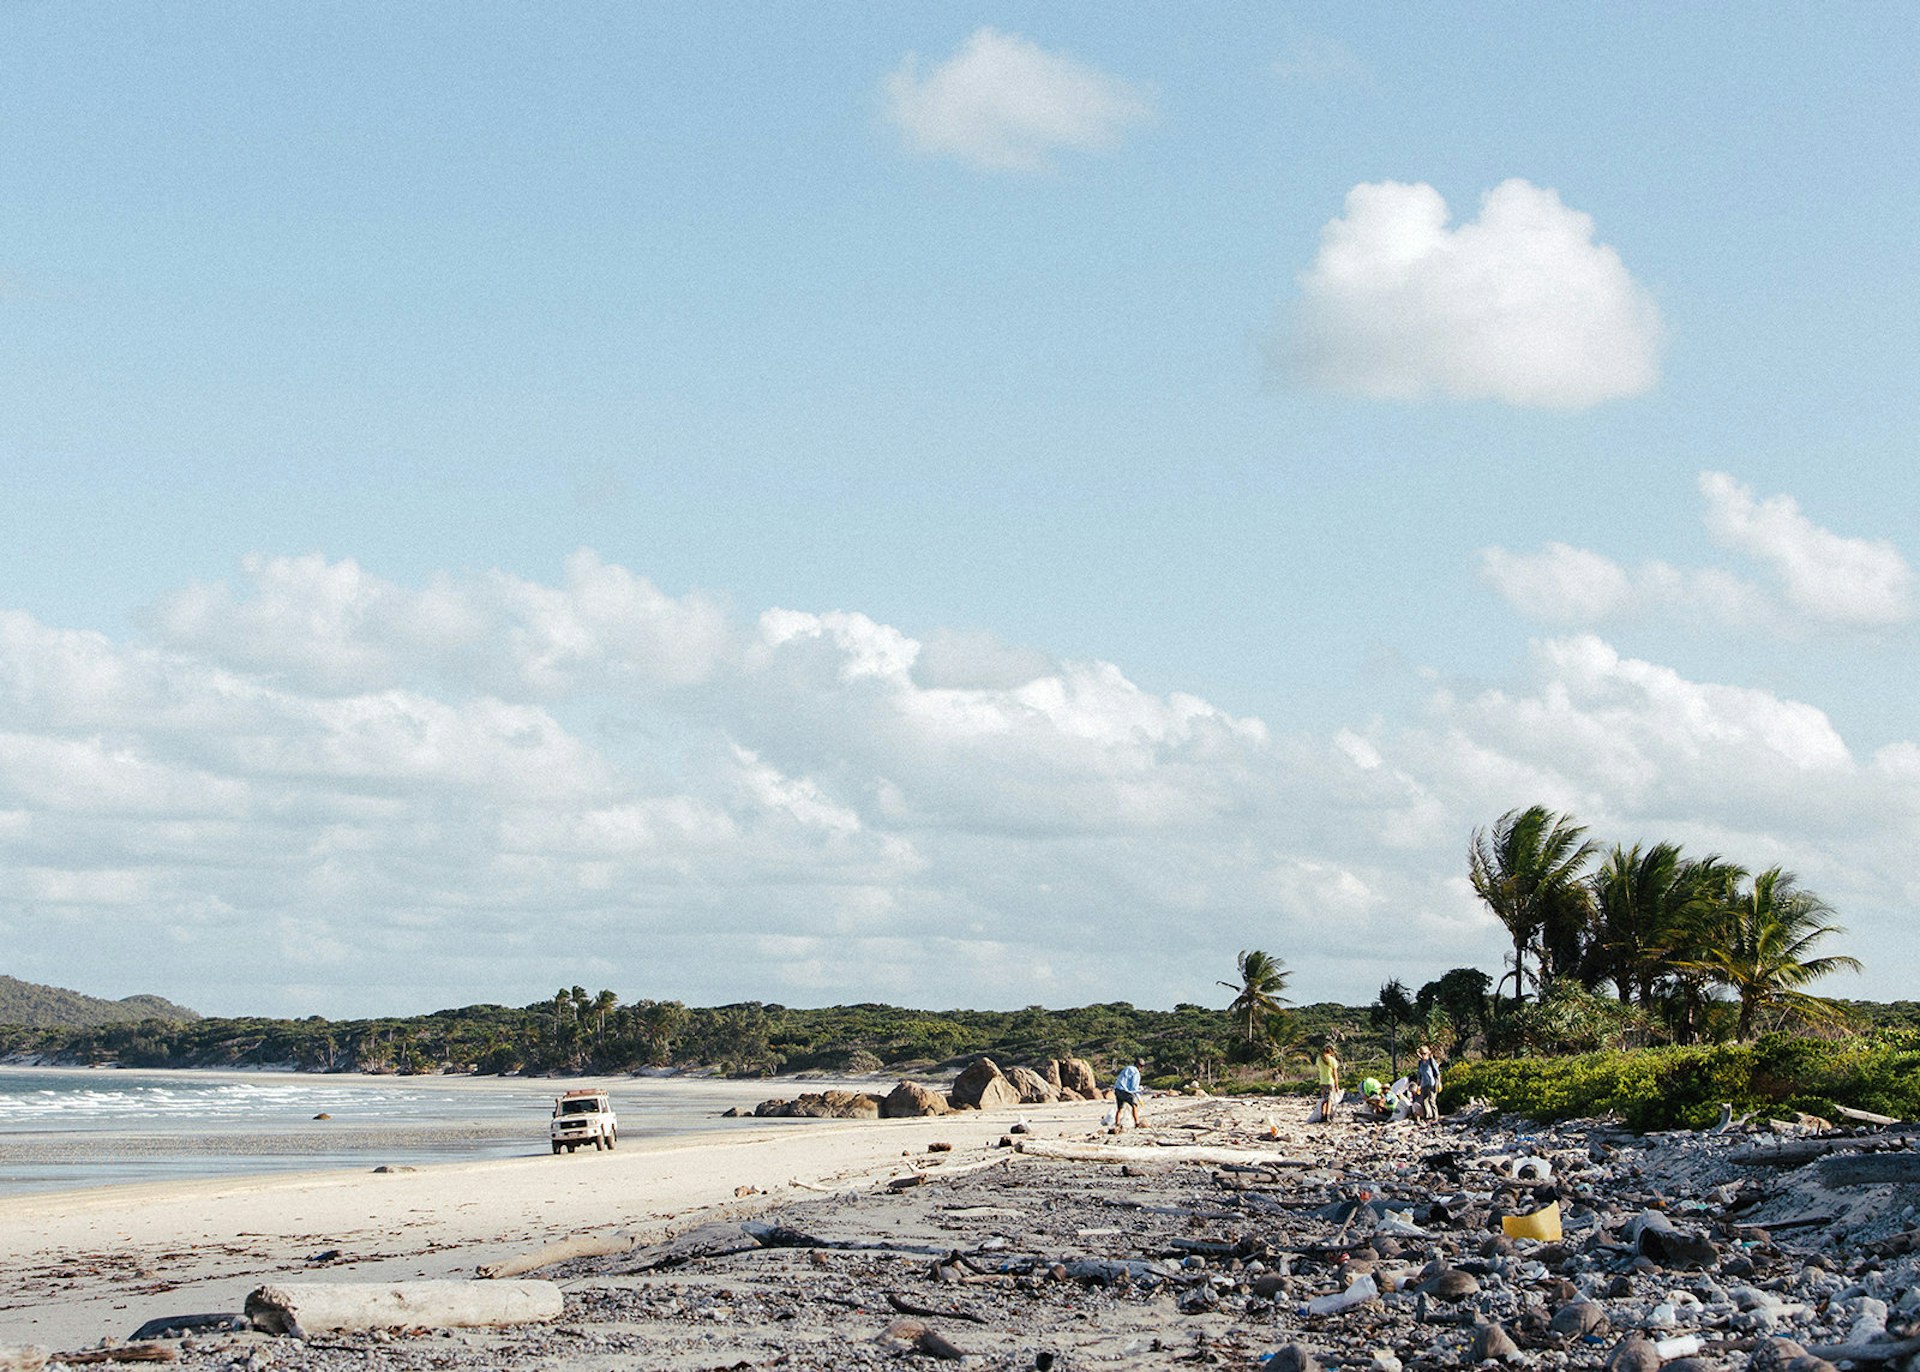 The volunteers of the Clean Coast Collective cleaning up a beach in Australia © Clean Coast Collective 